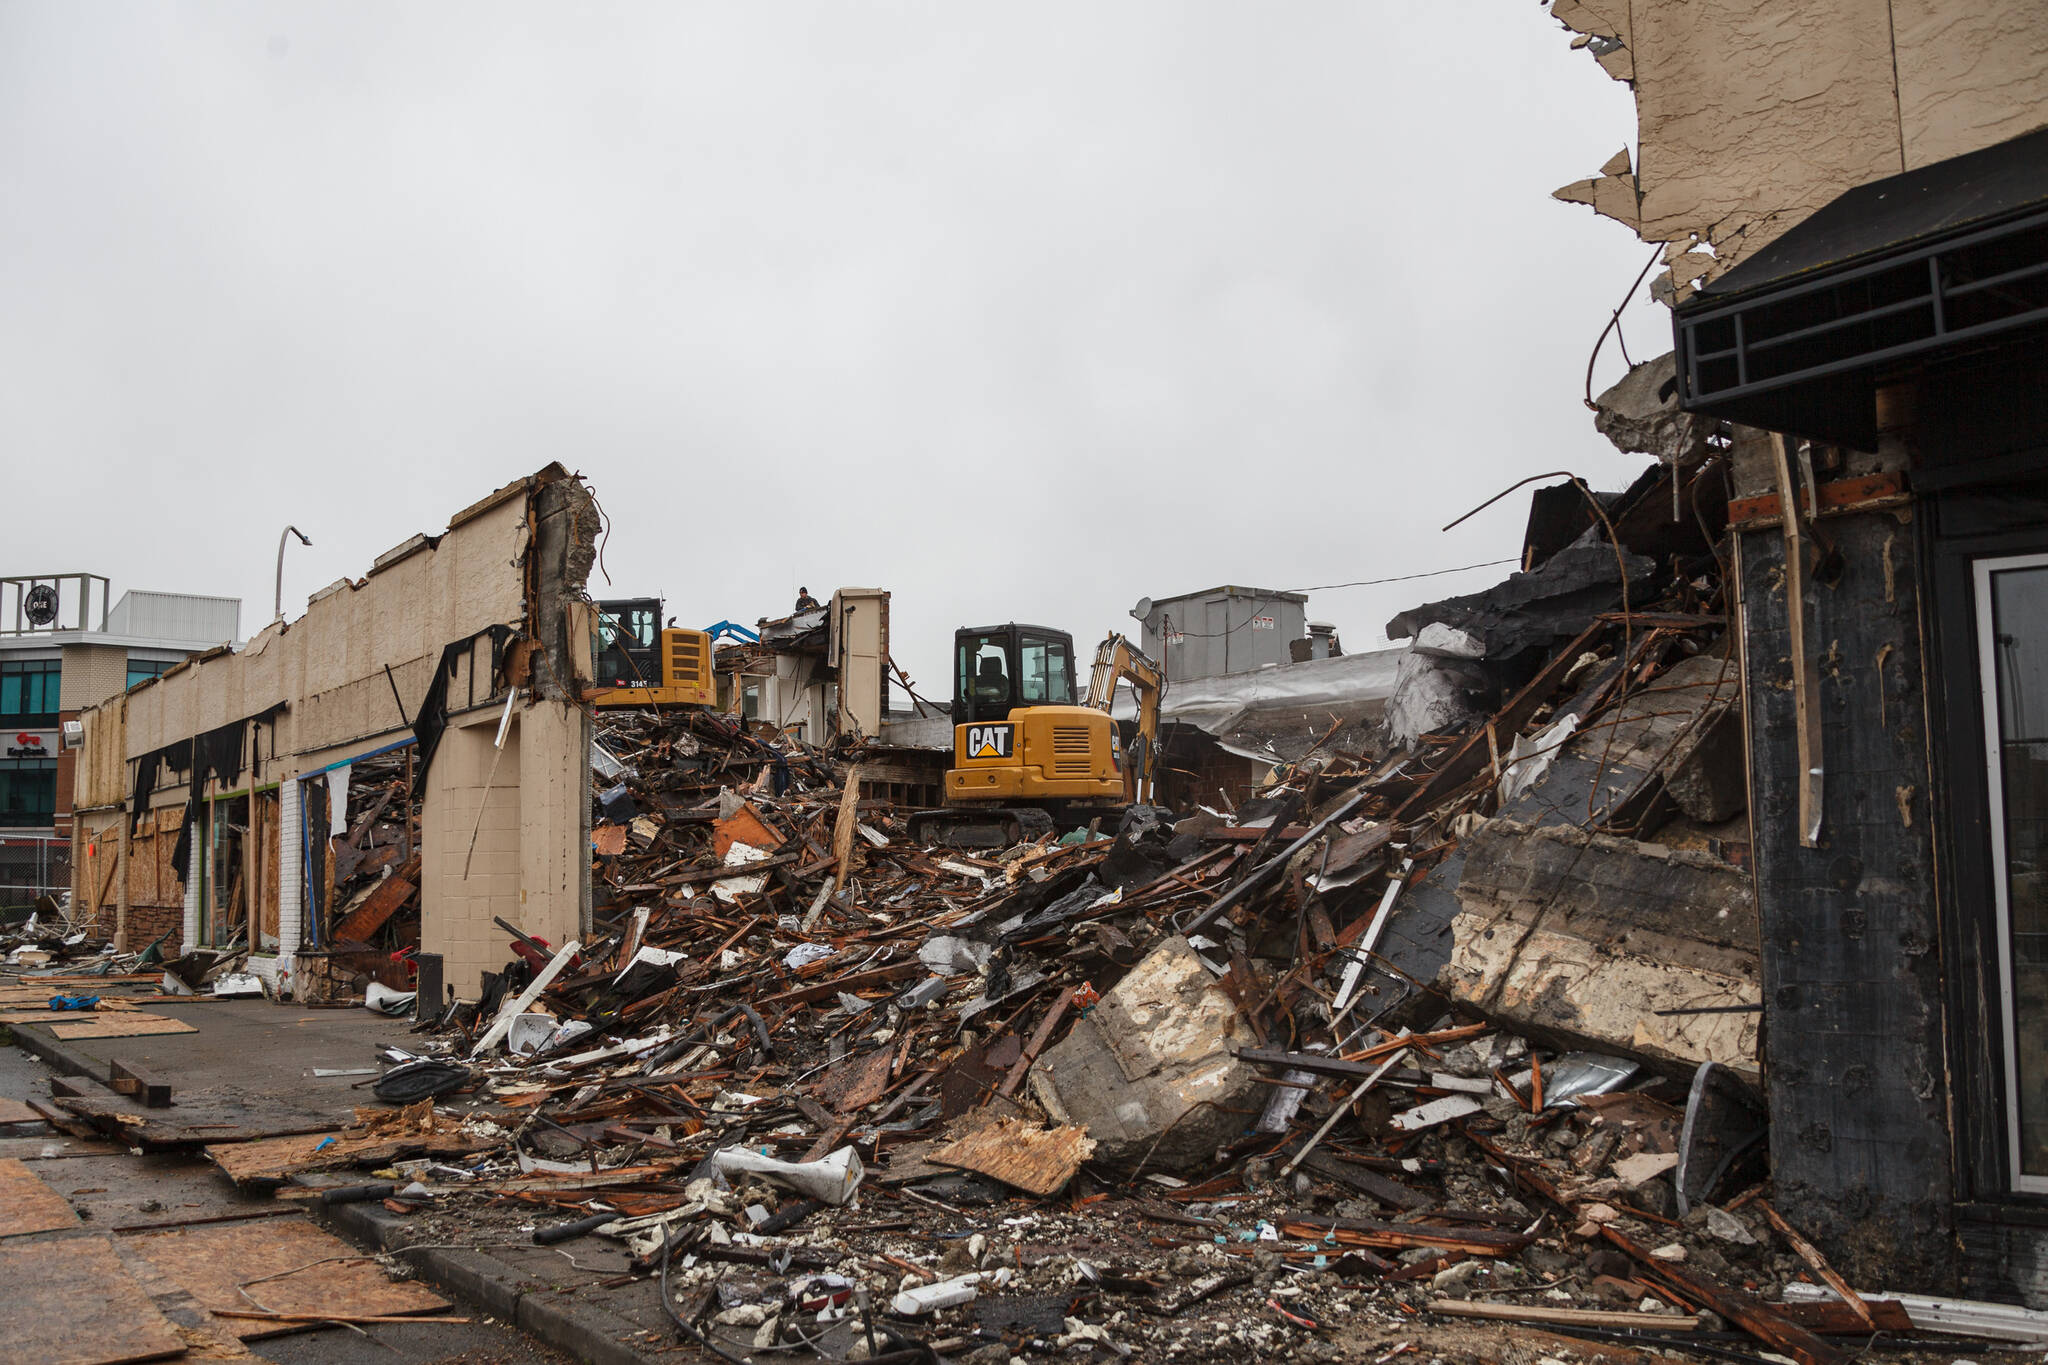 Excavators demolish the Max House Apartments complex in downtown Auburn on Wednesday, Dec. 15. Photo by Henry Stewart-Wood/Sound Publishing